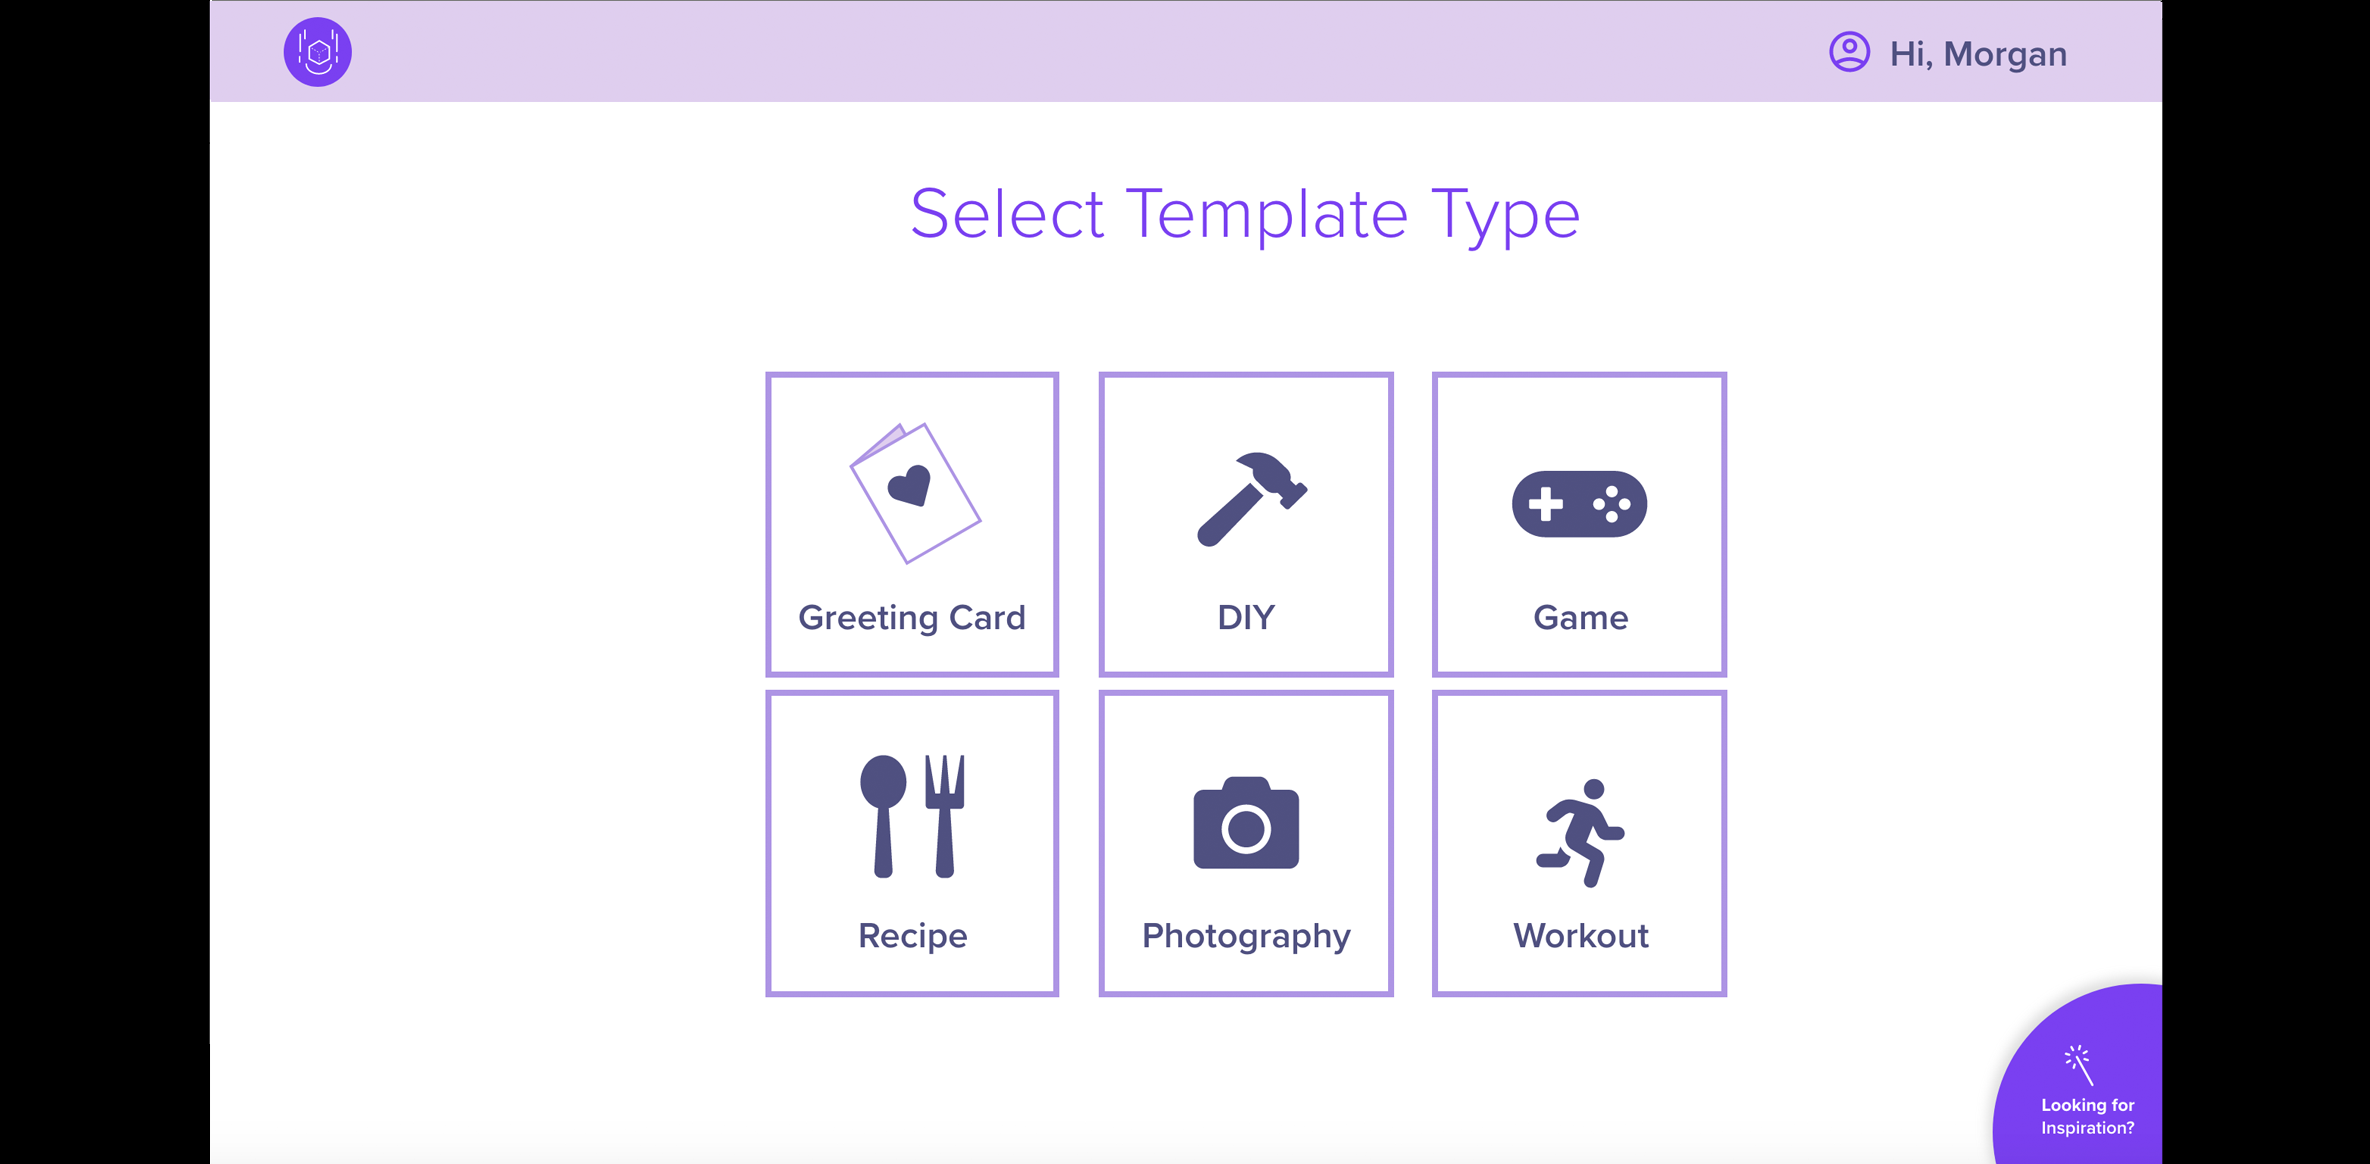 Select Template Type